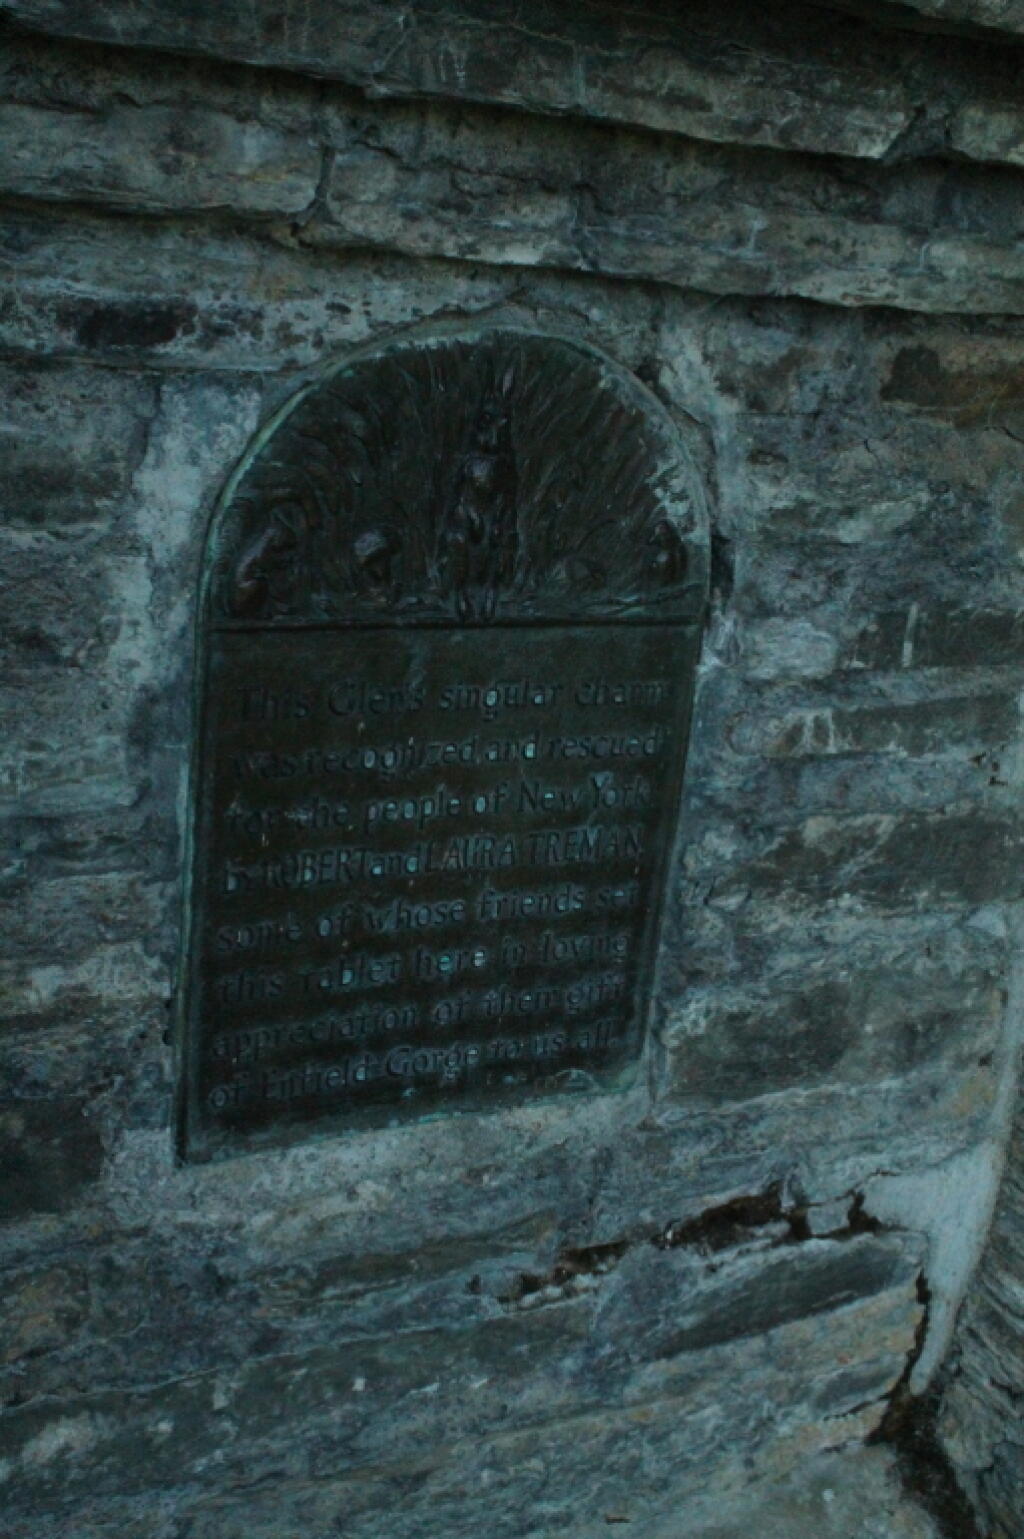 CCC Marker on Cliffside Stairs